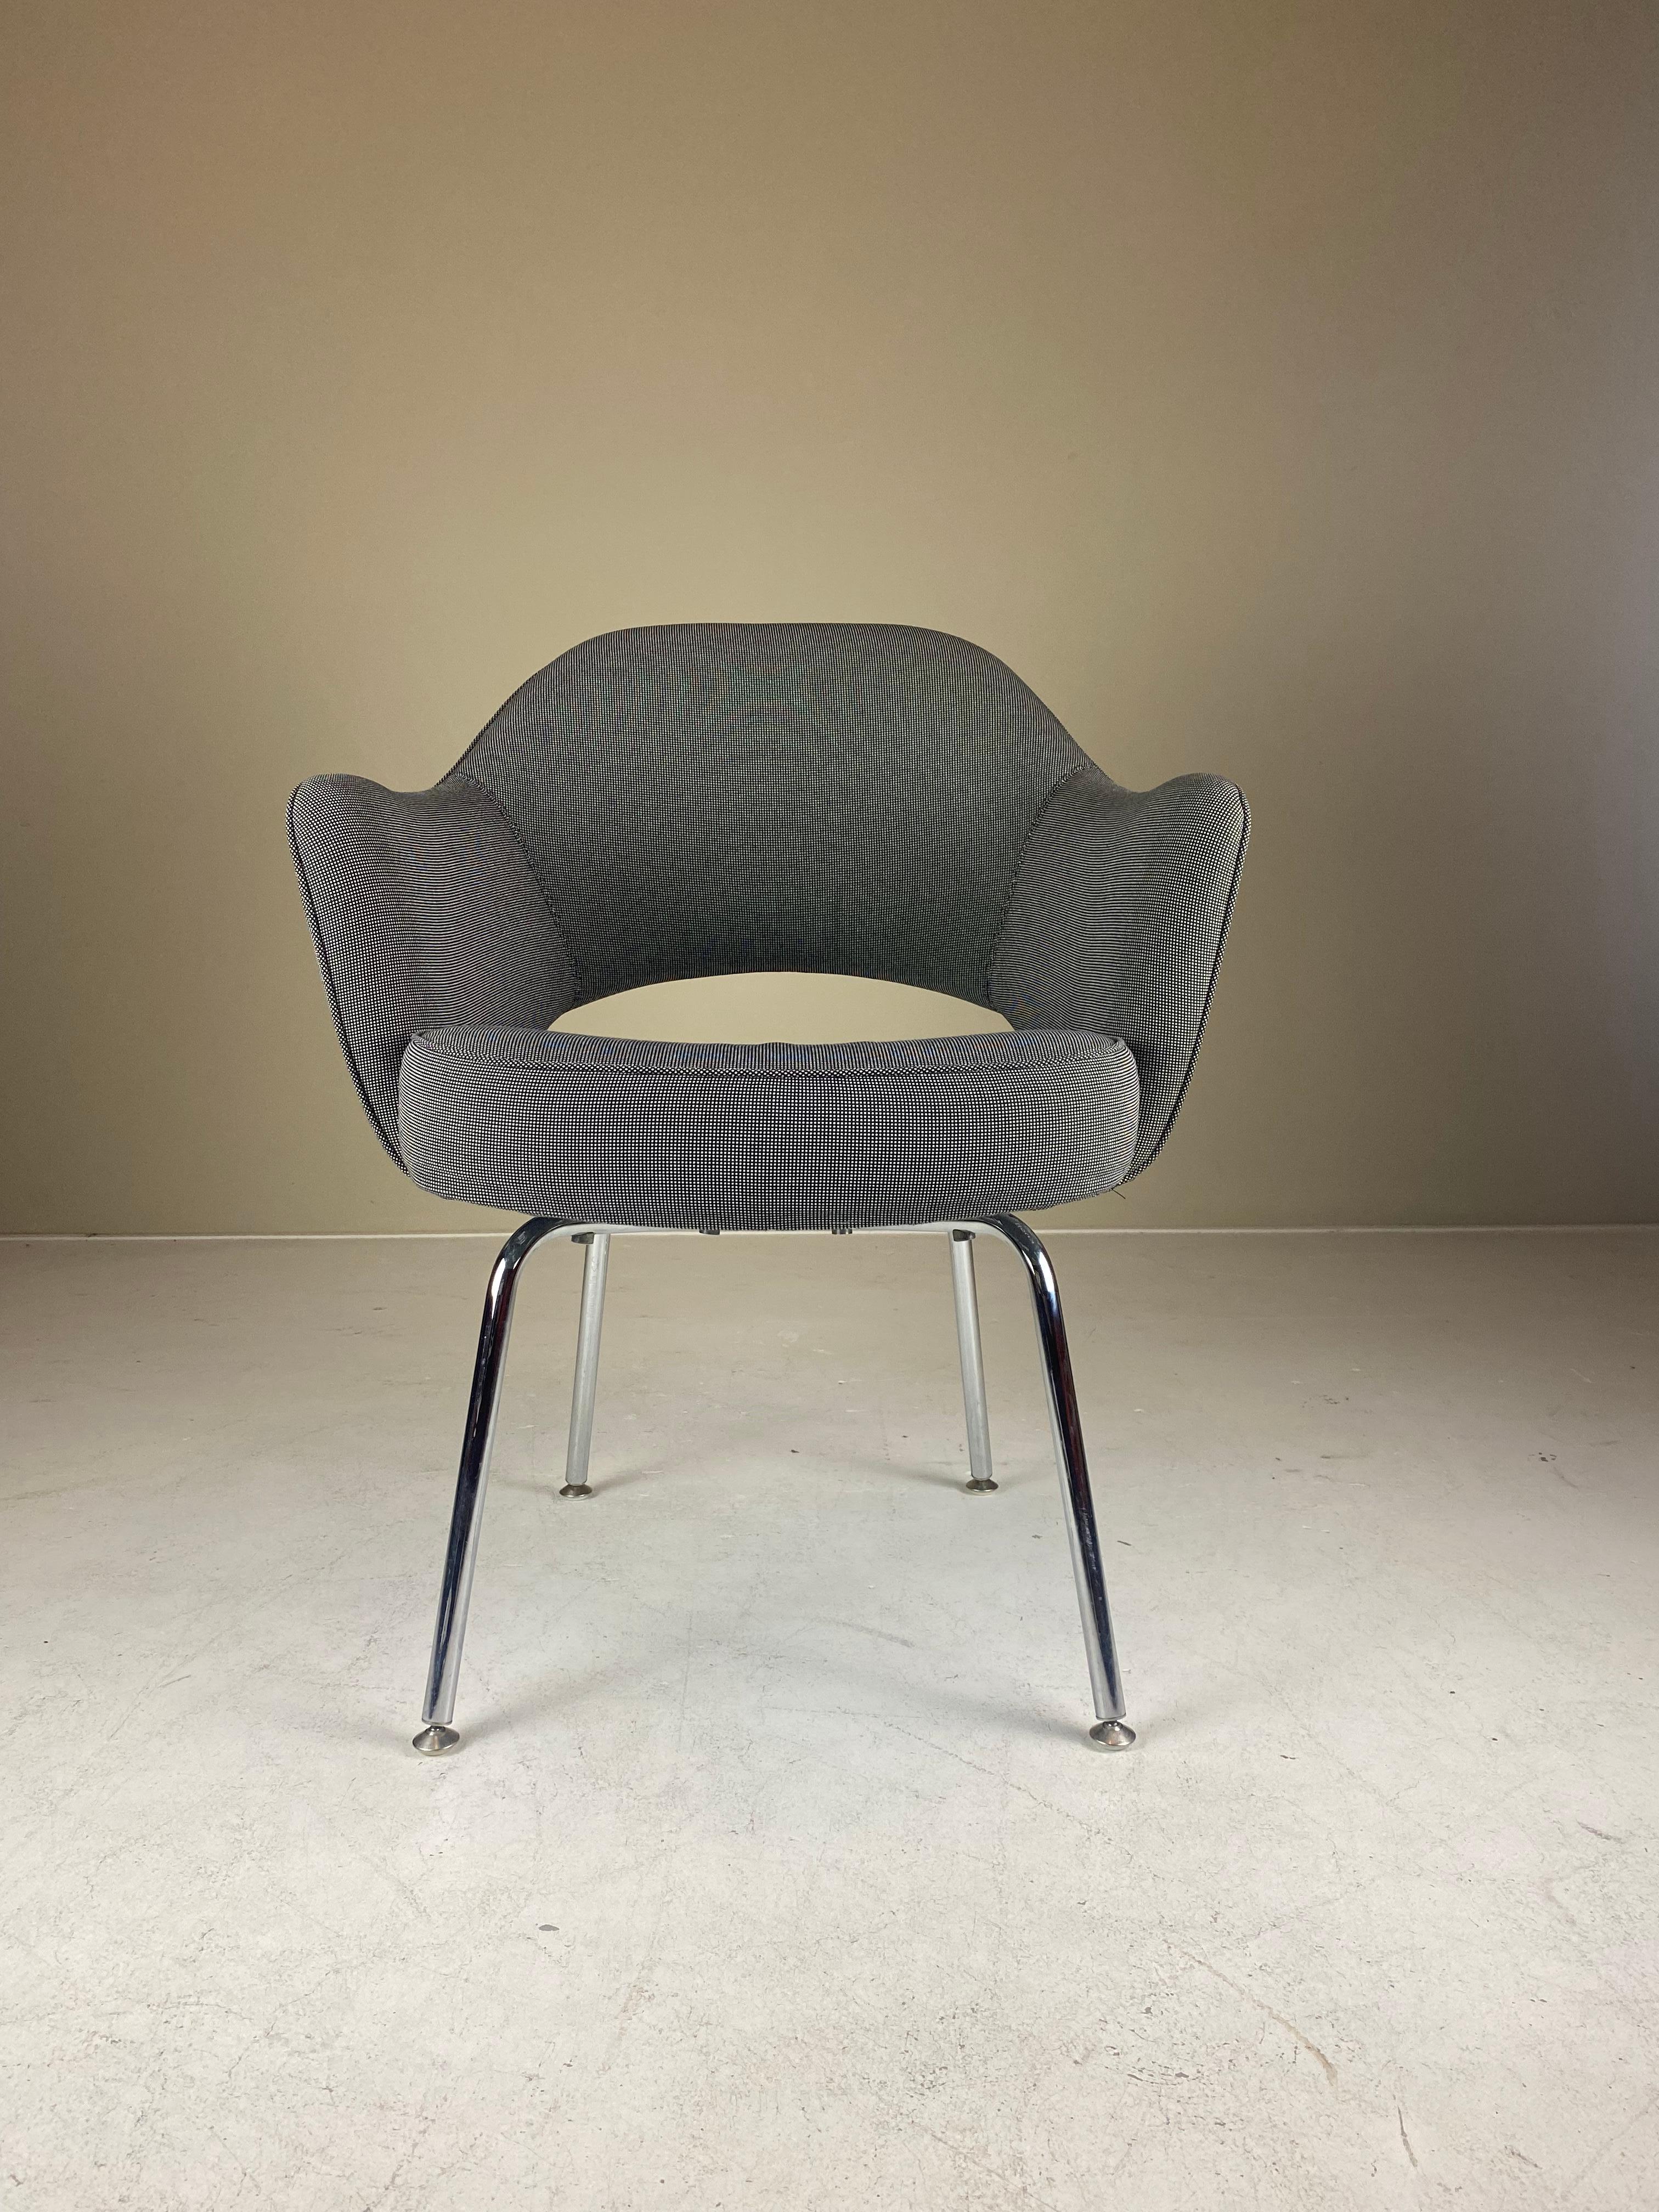 Following up on the collaboration with Charles Eames, with whom he won the Museum of Modern Art's 'Organic Design' competition in 1941, Eero Saarinen wanted to research further how to produce a comfortable chair through the organic shape of a shell.